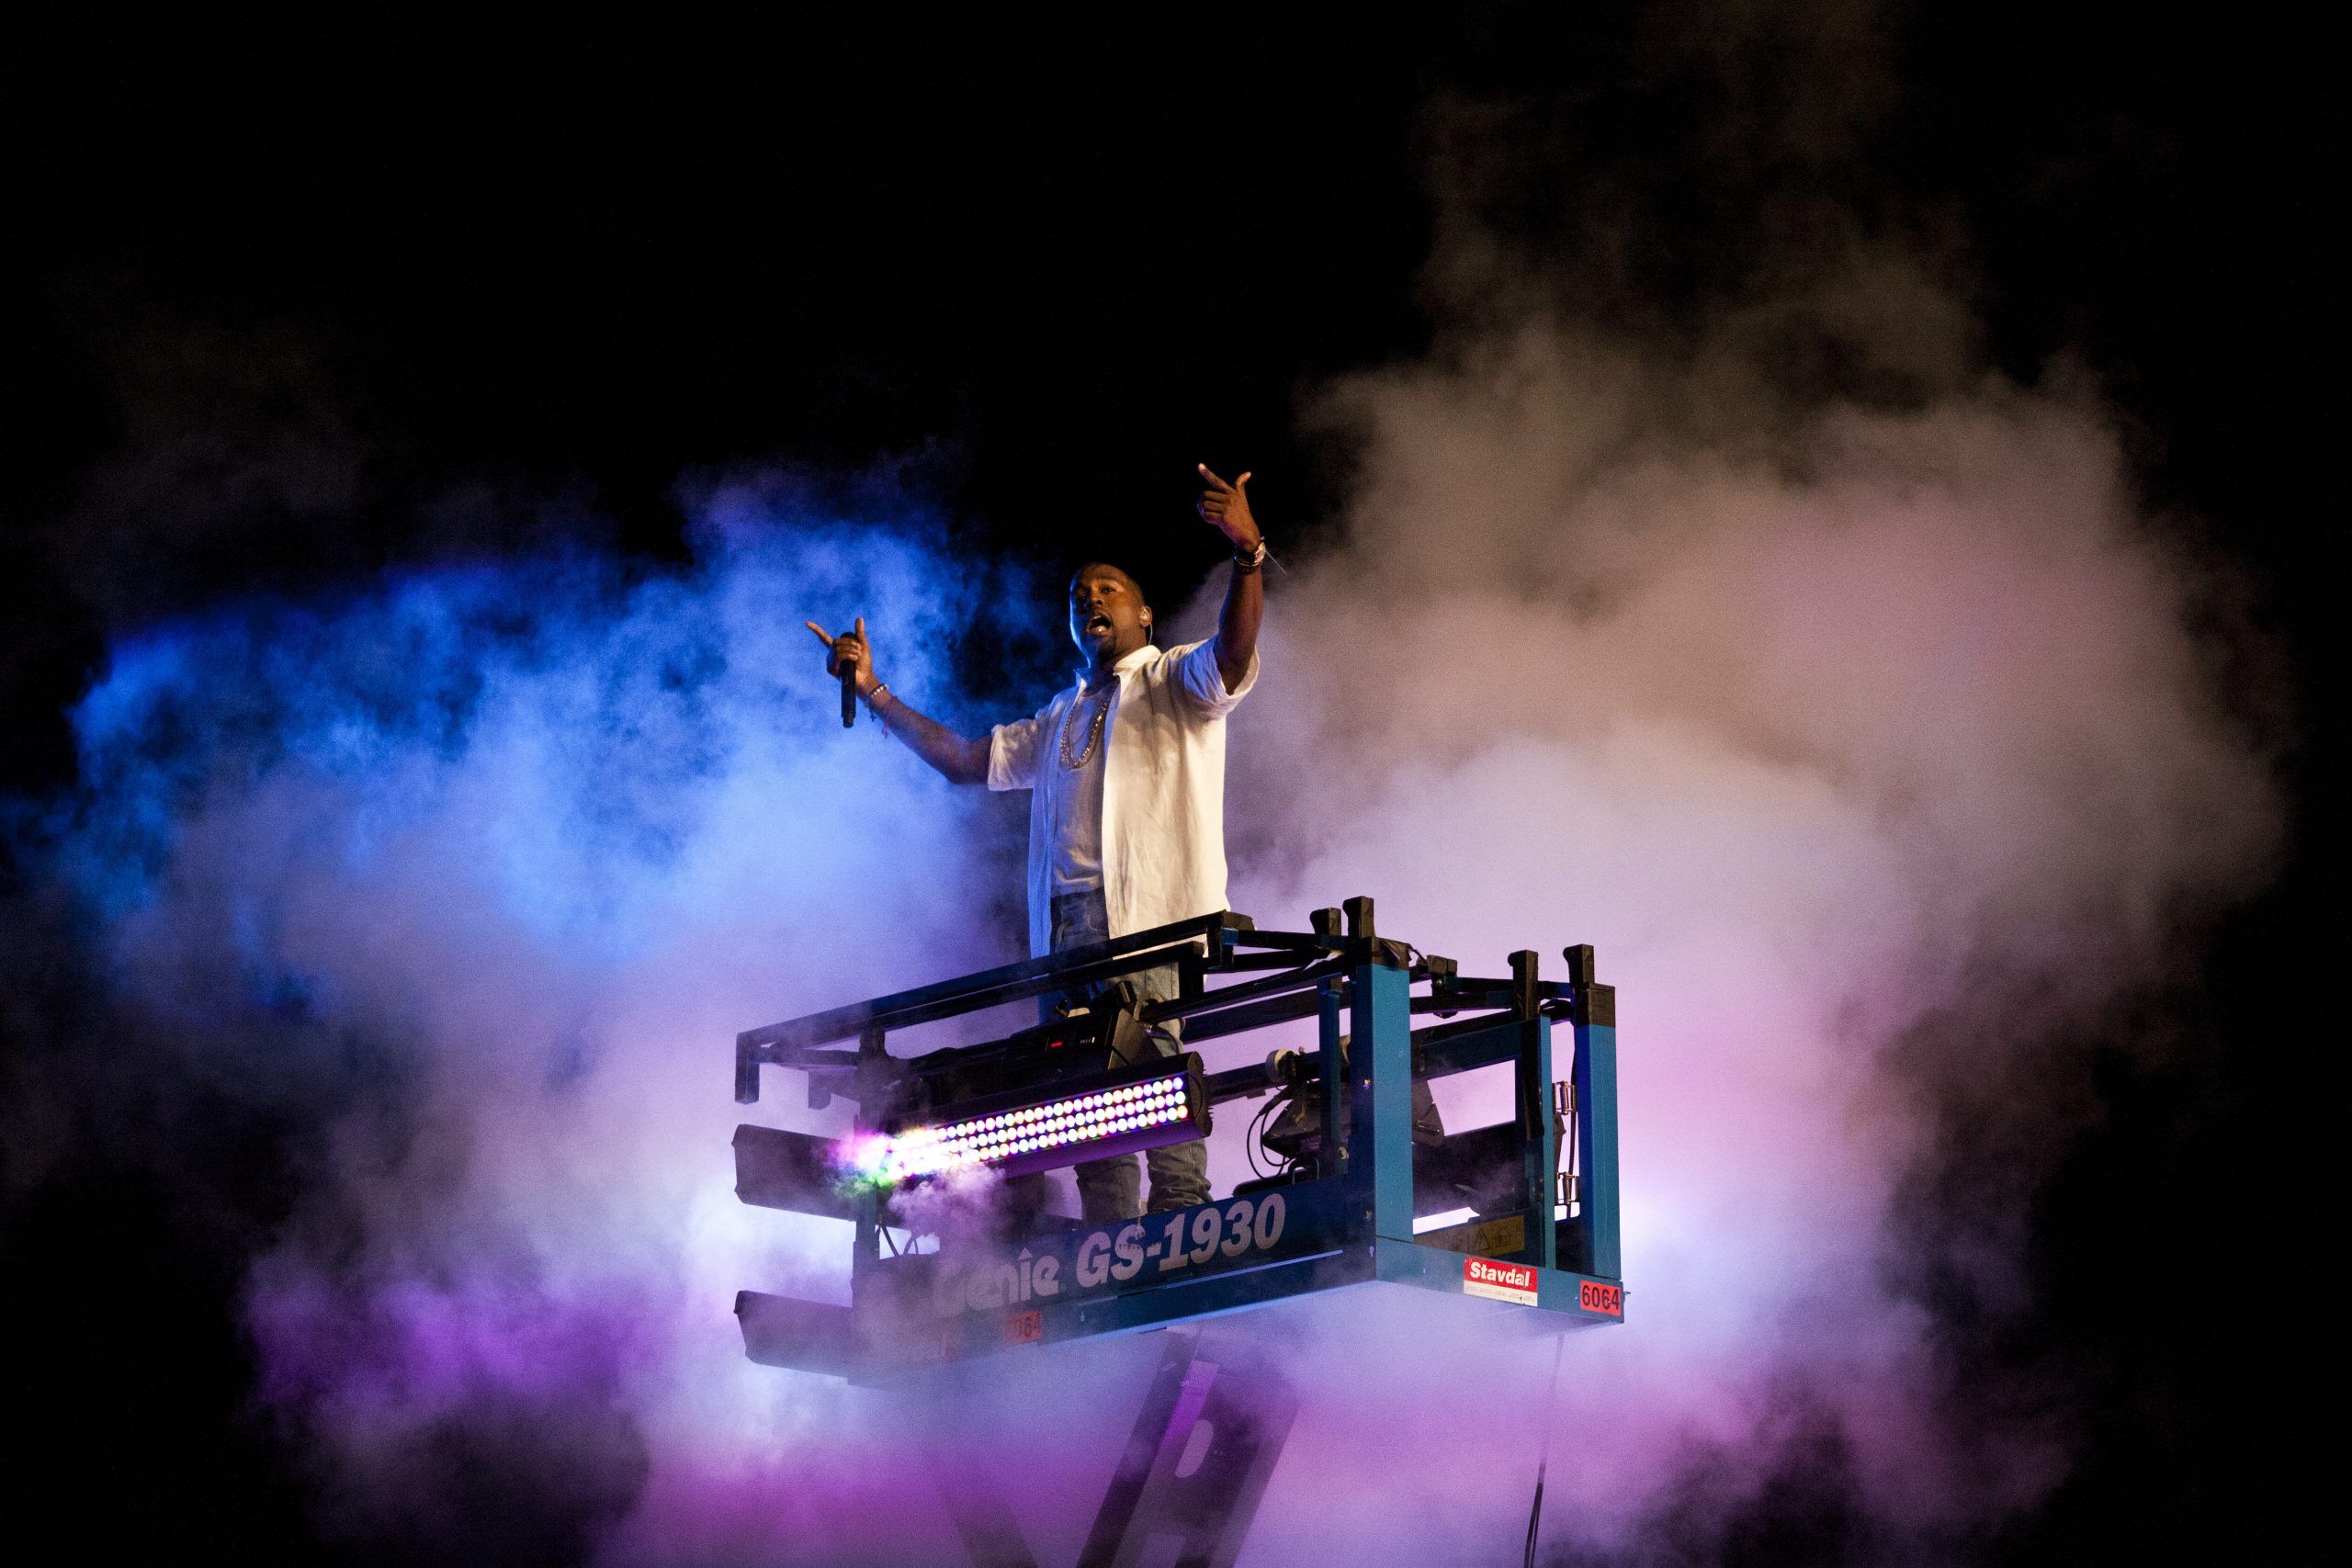 Kanye West performs at the Way Out West festival on August 13, 2011 in Gothenburg, Sweden.